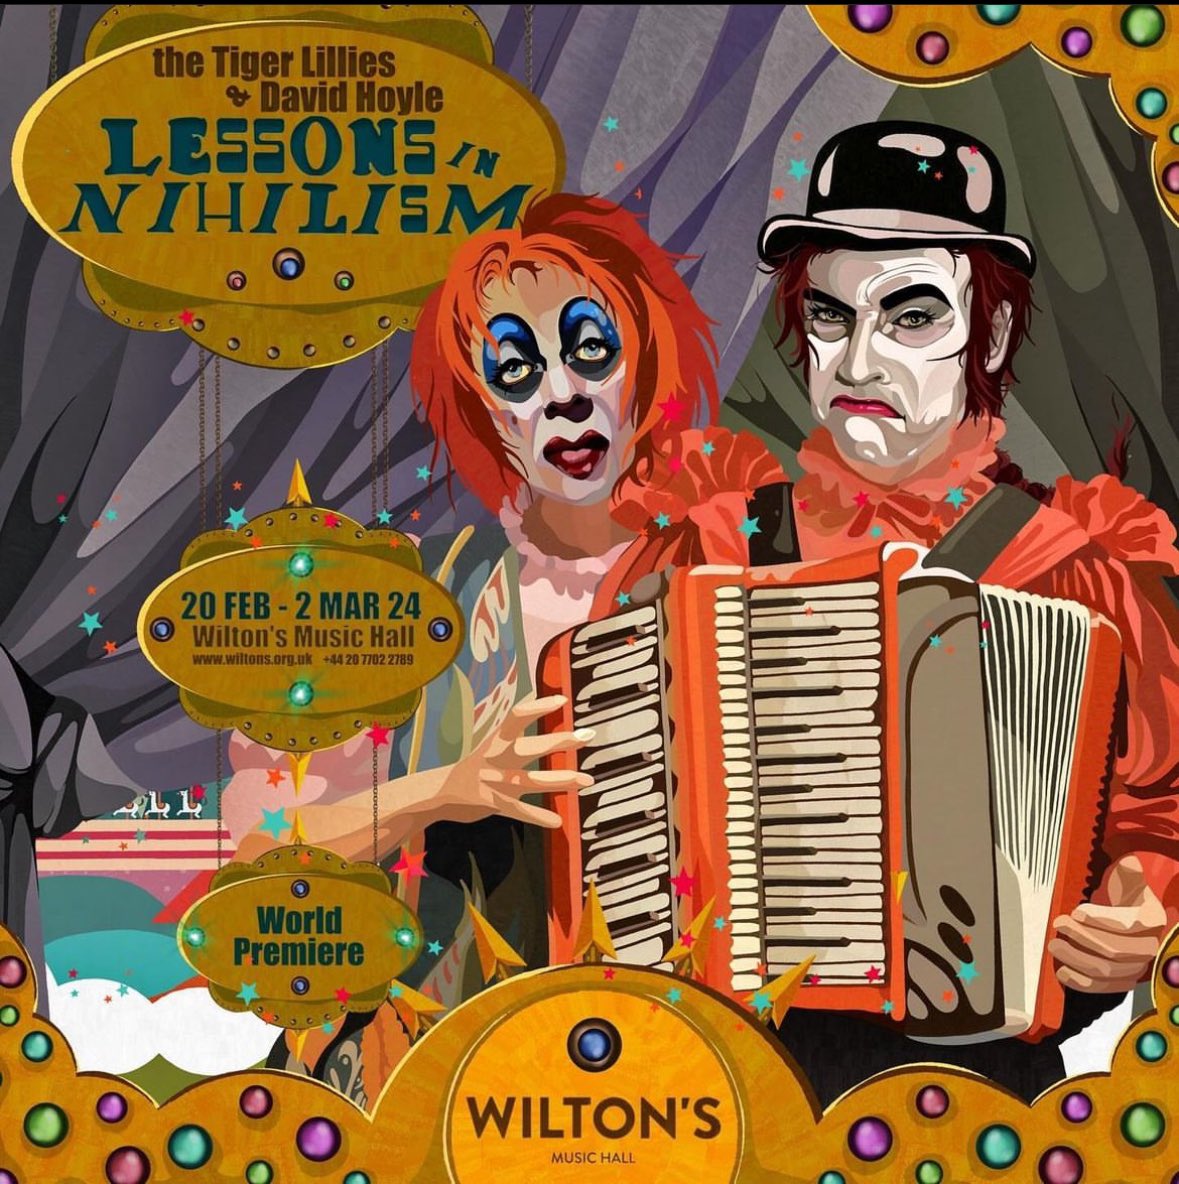 Lessons in Nihilism in London! 20 Feb-2 March at Wilton’s Music Hall!